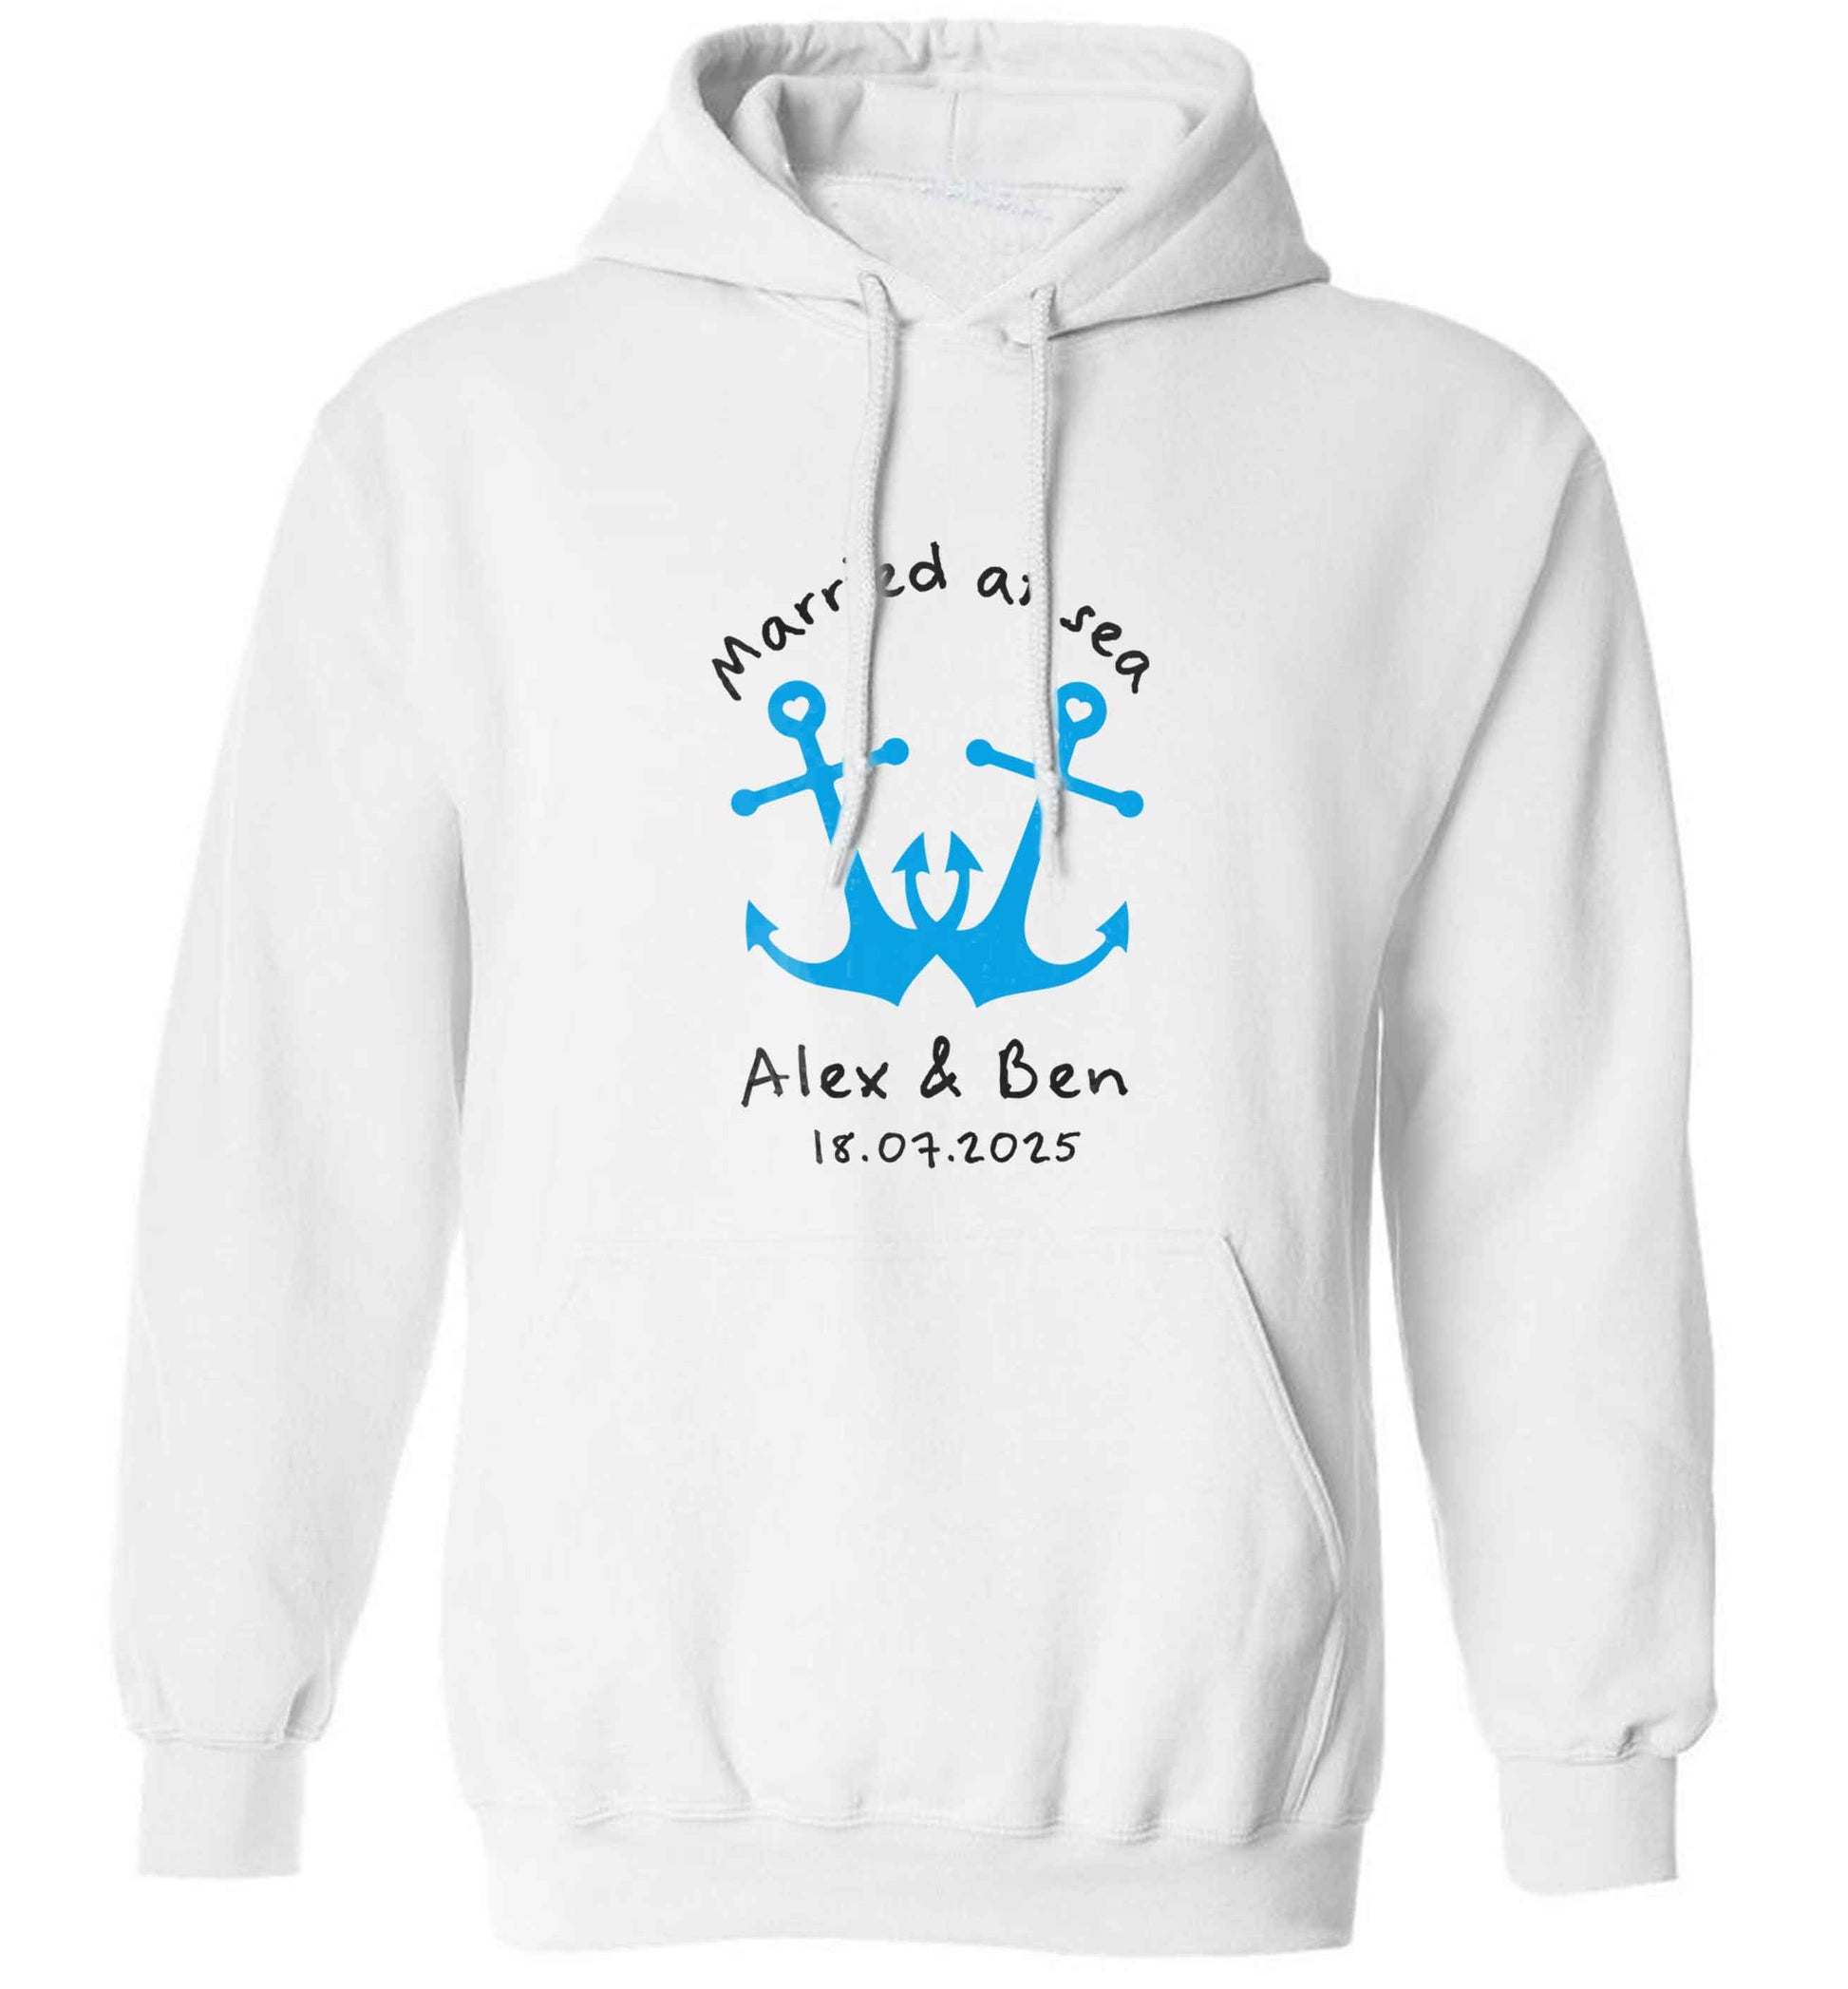 Married at sea blue anchors adults unisex white hoodie 2XL